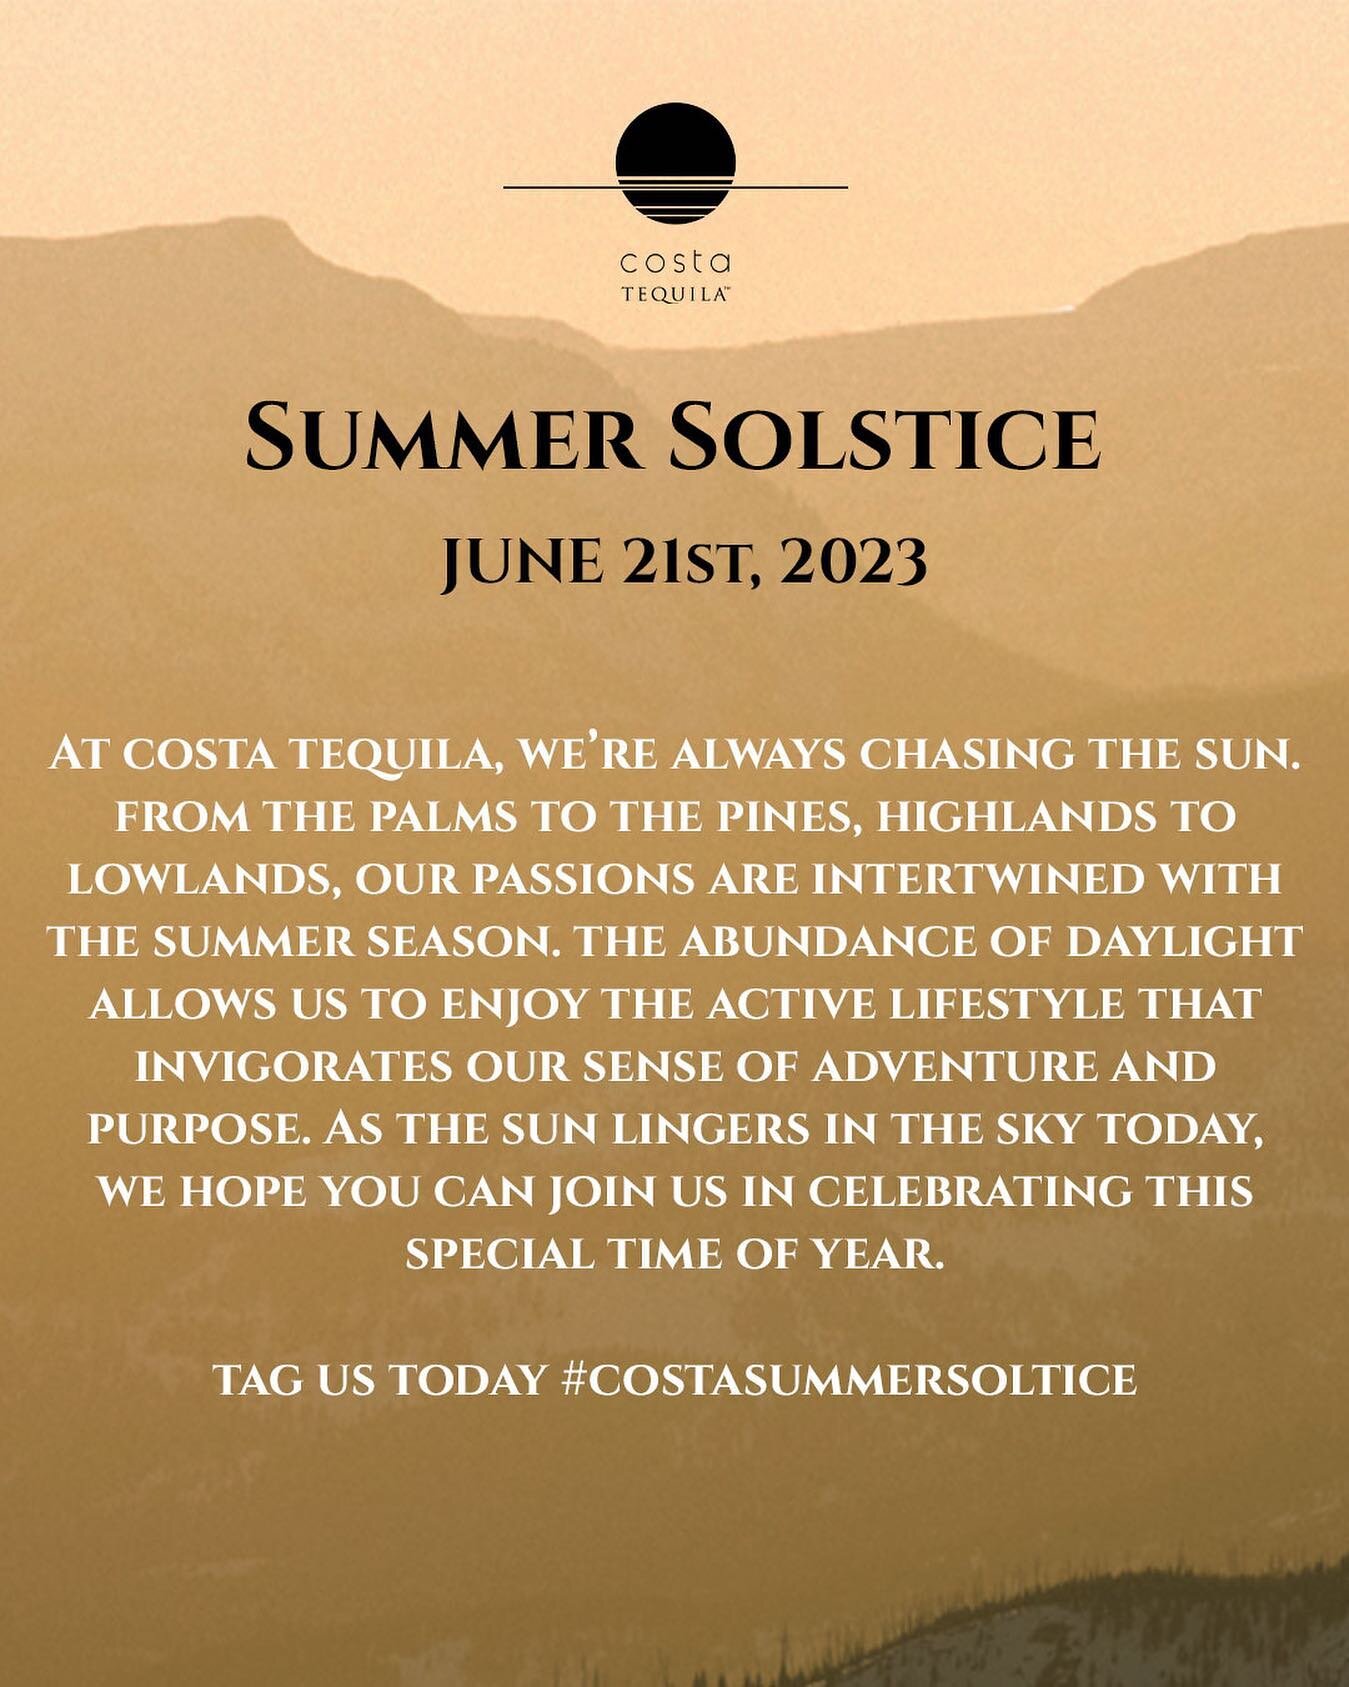 Join us in celebrating our favorite day of the year ☀️#costasummersolstice #costatequila